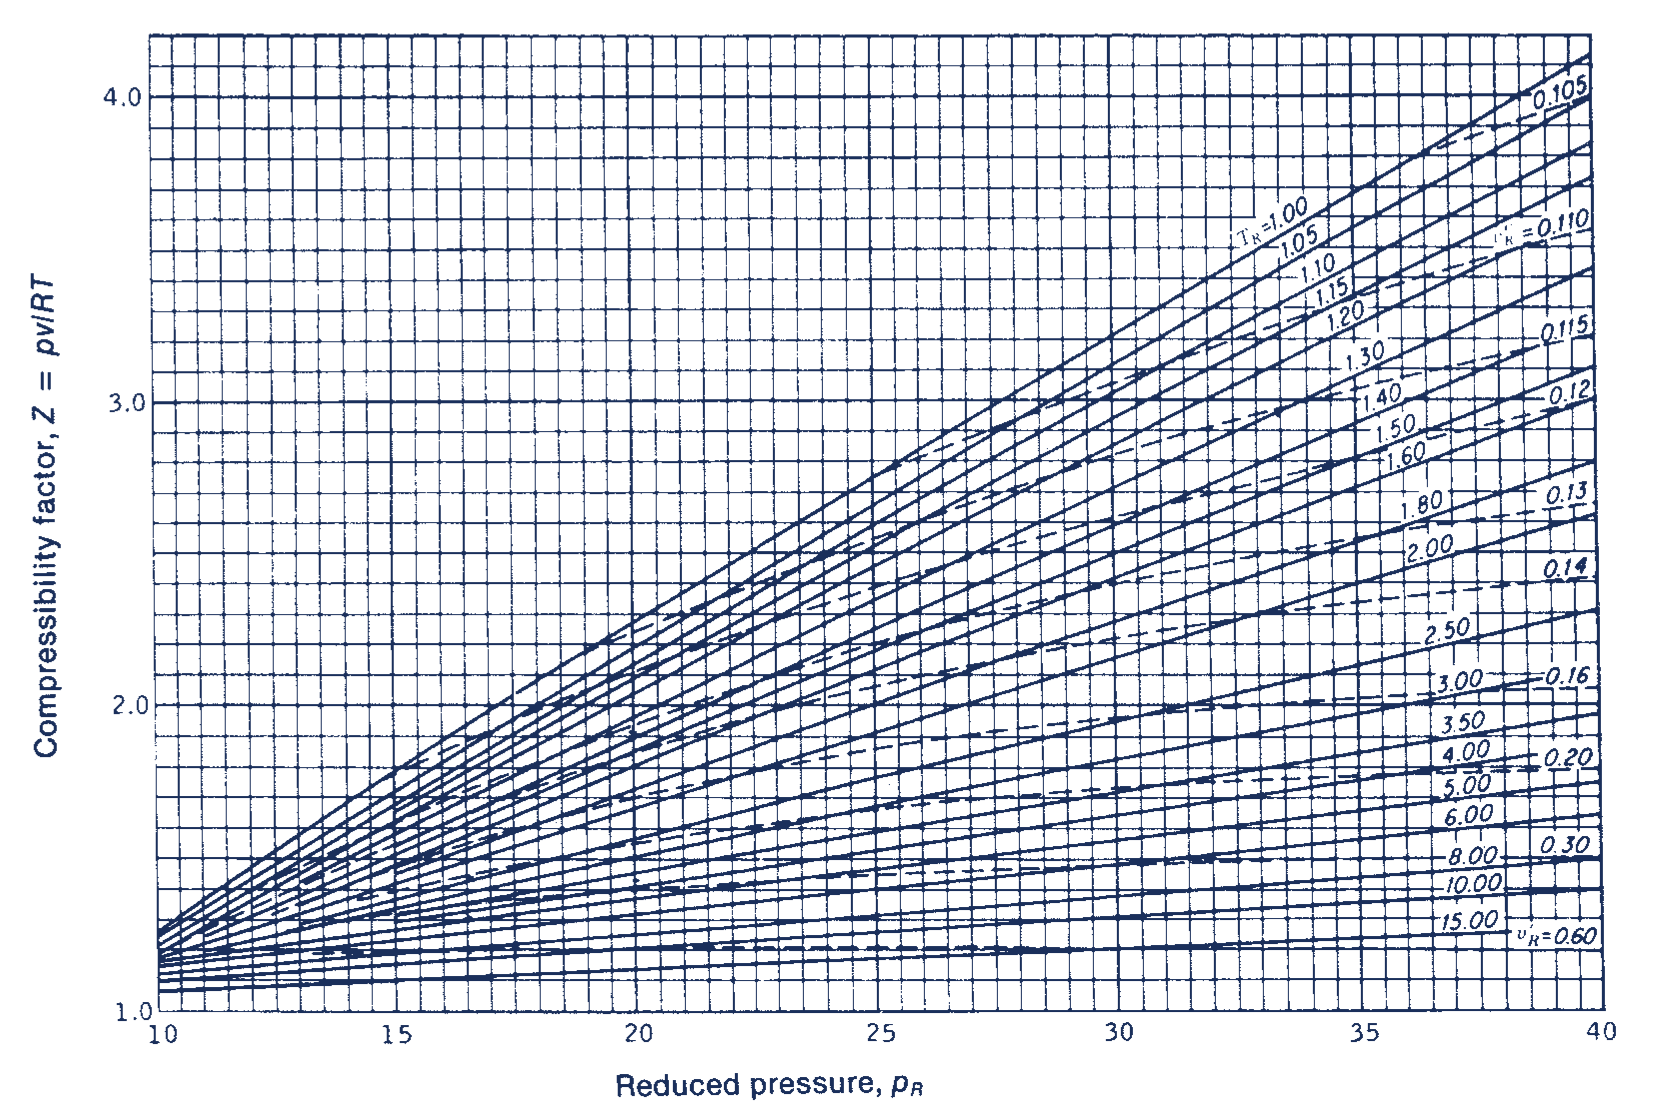 Generalized compressibility chart, reduced pressure between 10-40